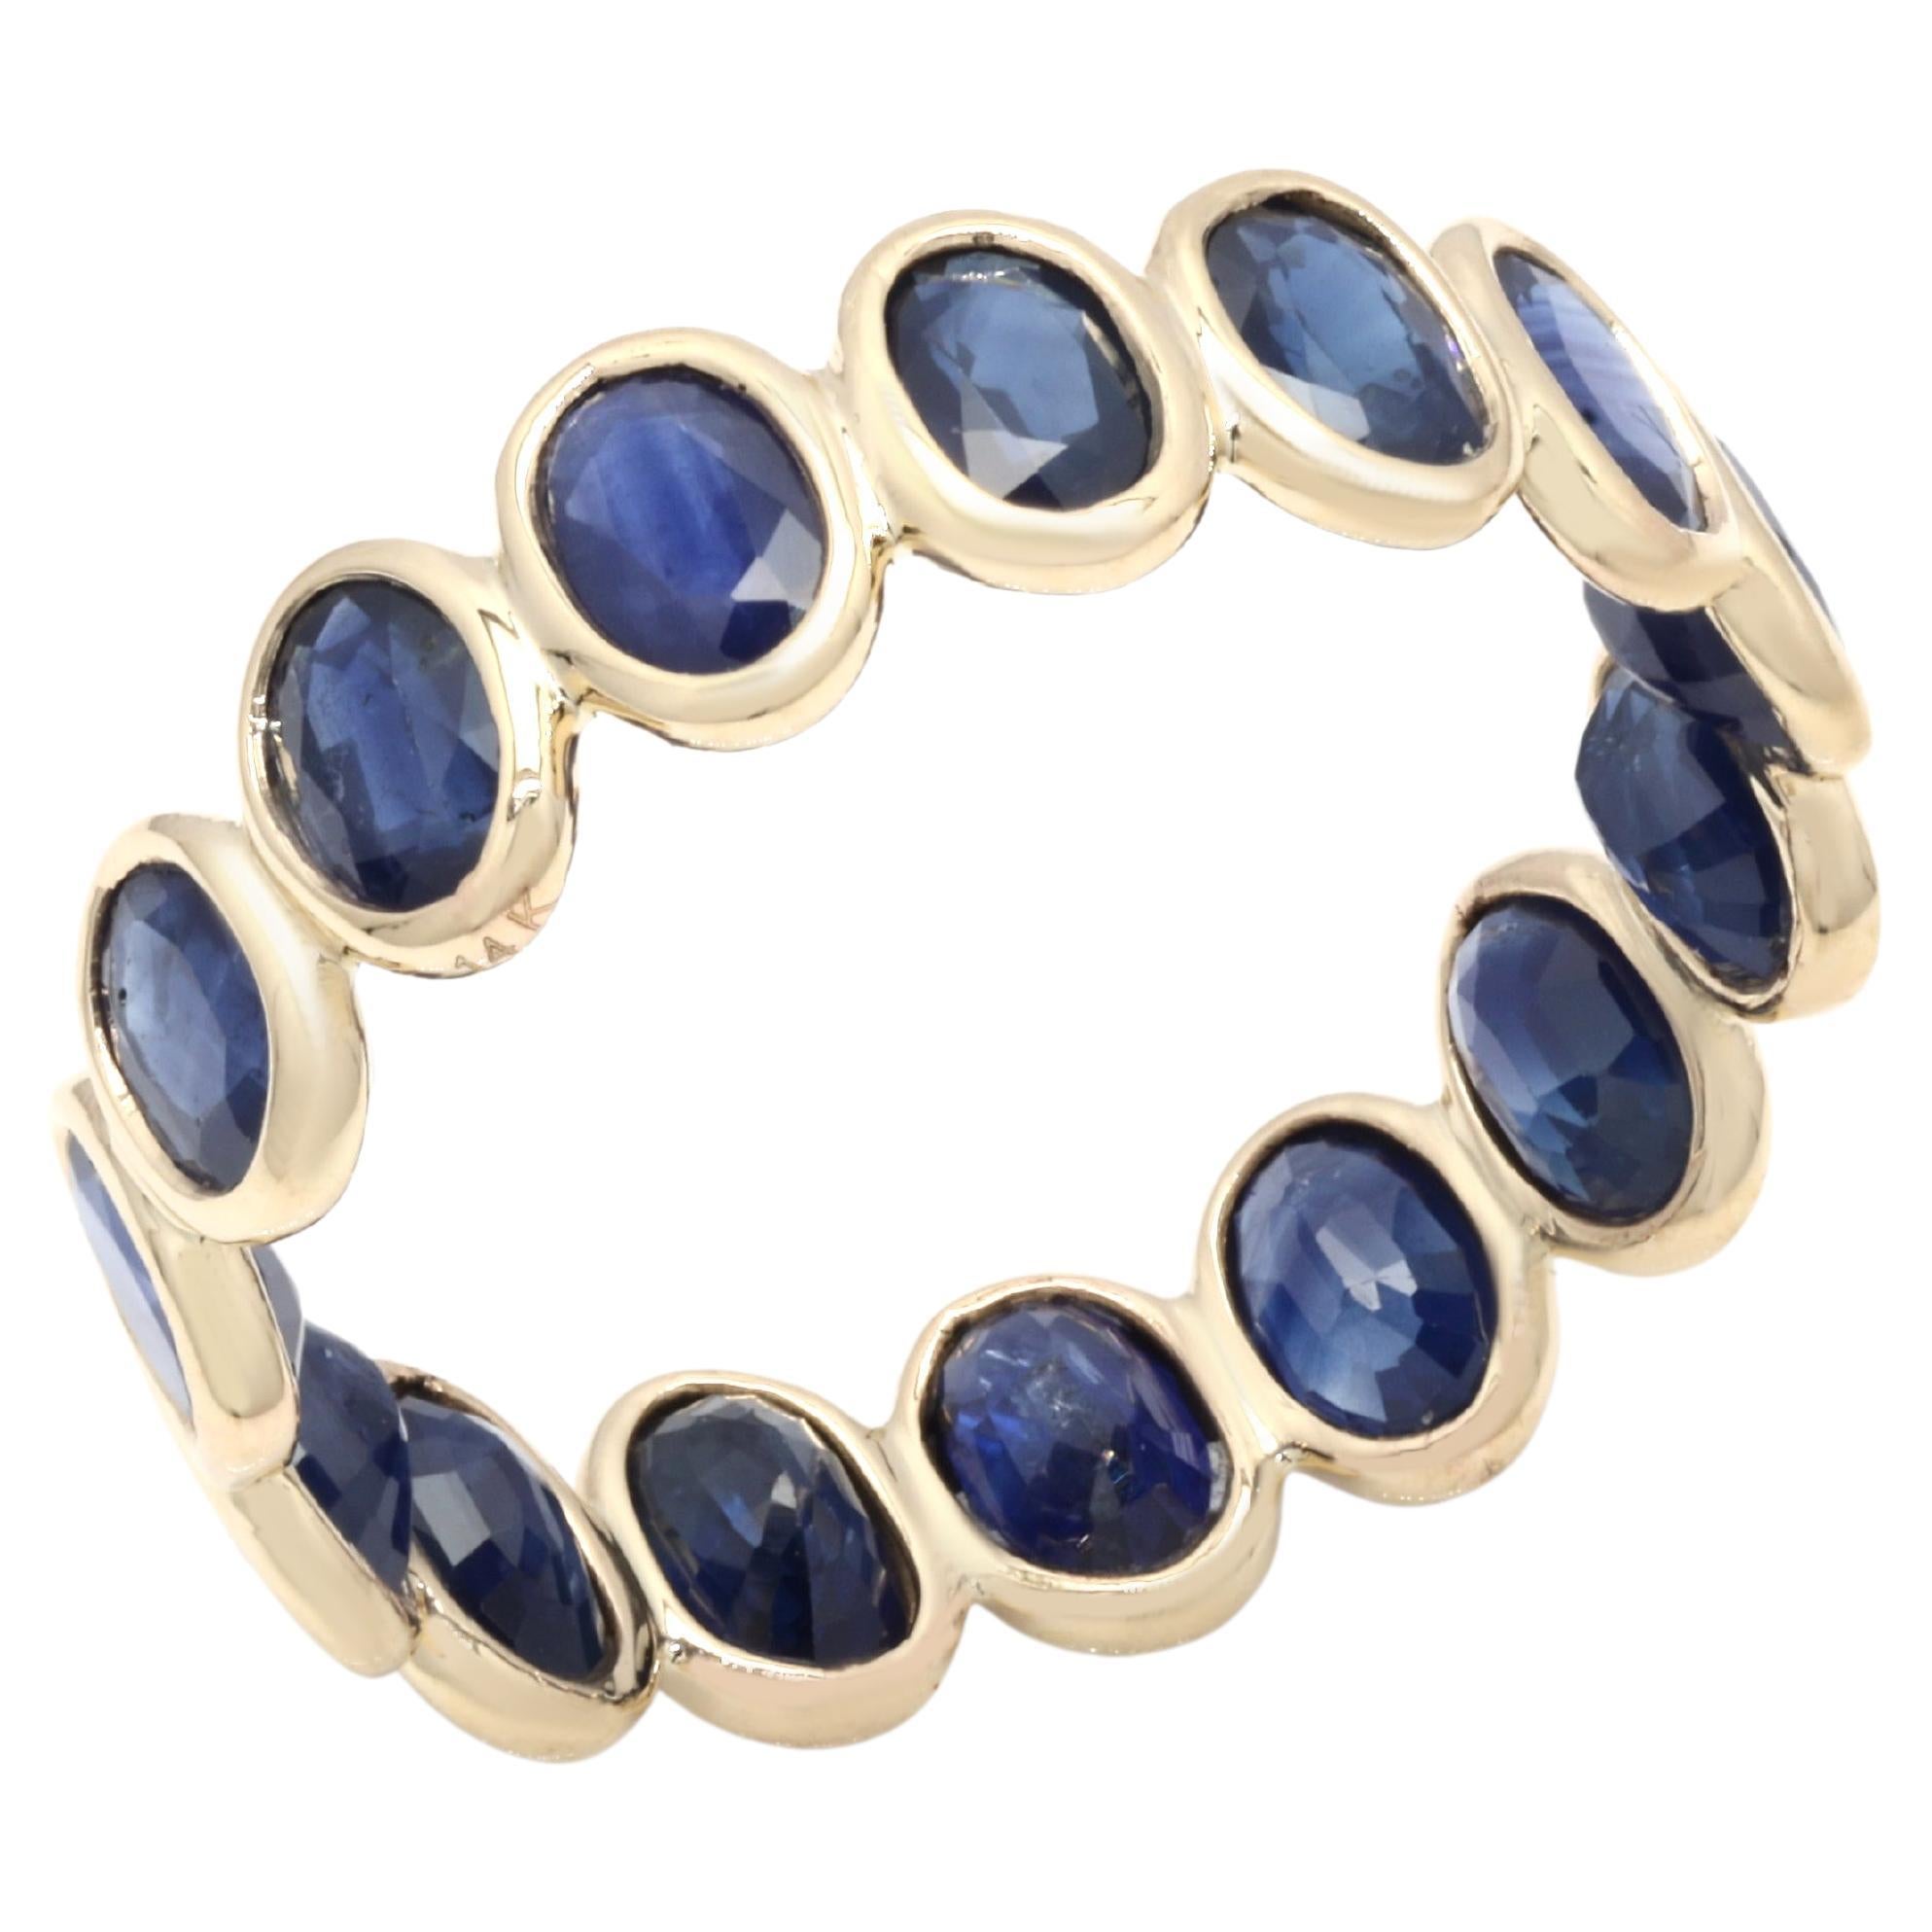 14K Yellow Gold 5 Carat Oval Cut Sapphire Eternity Band Ring